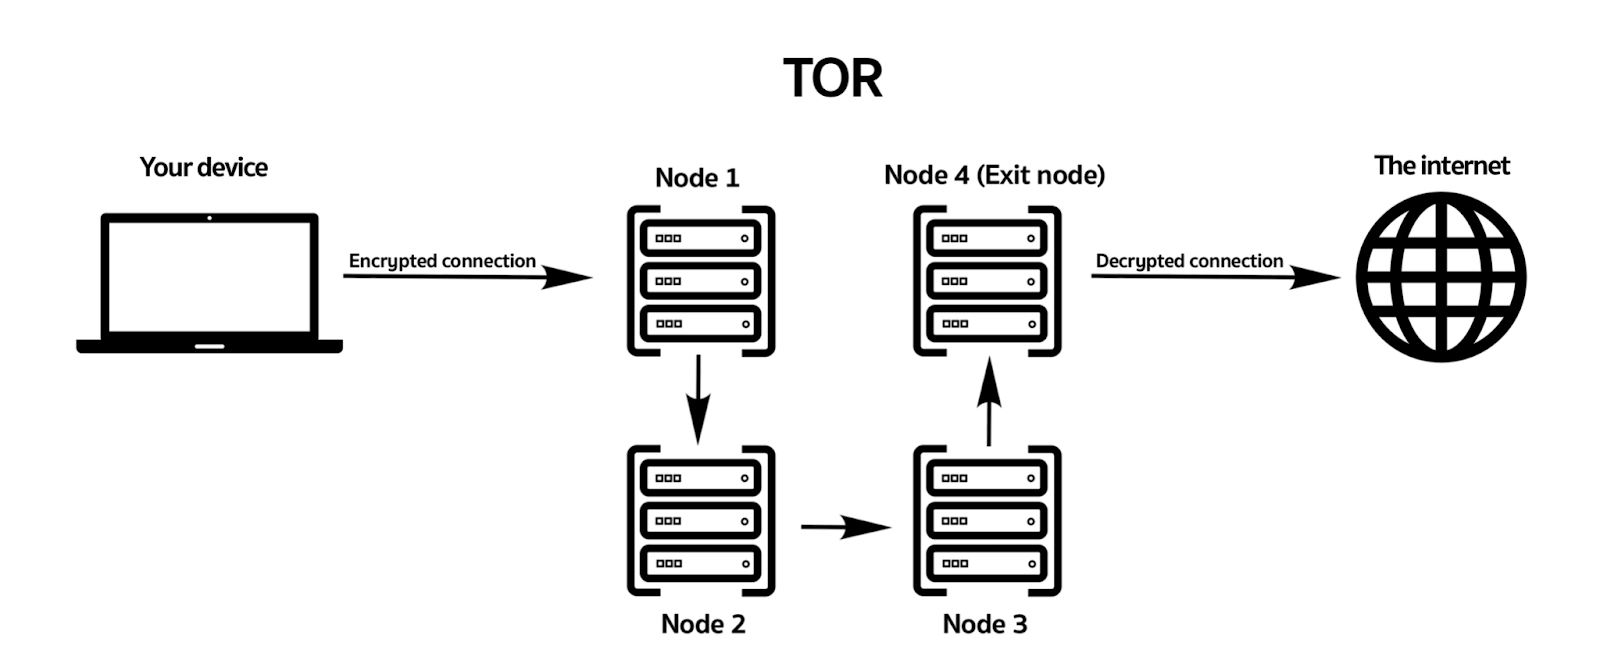 TOR Overview